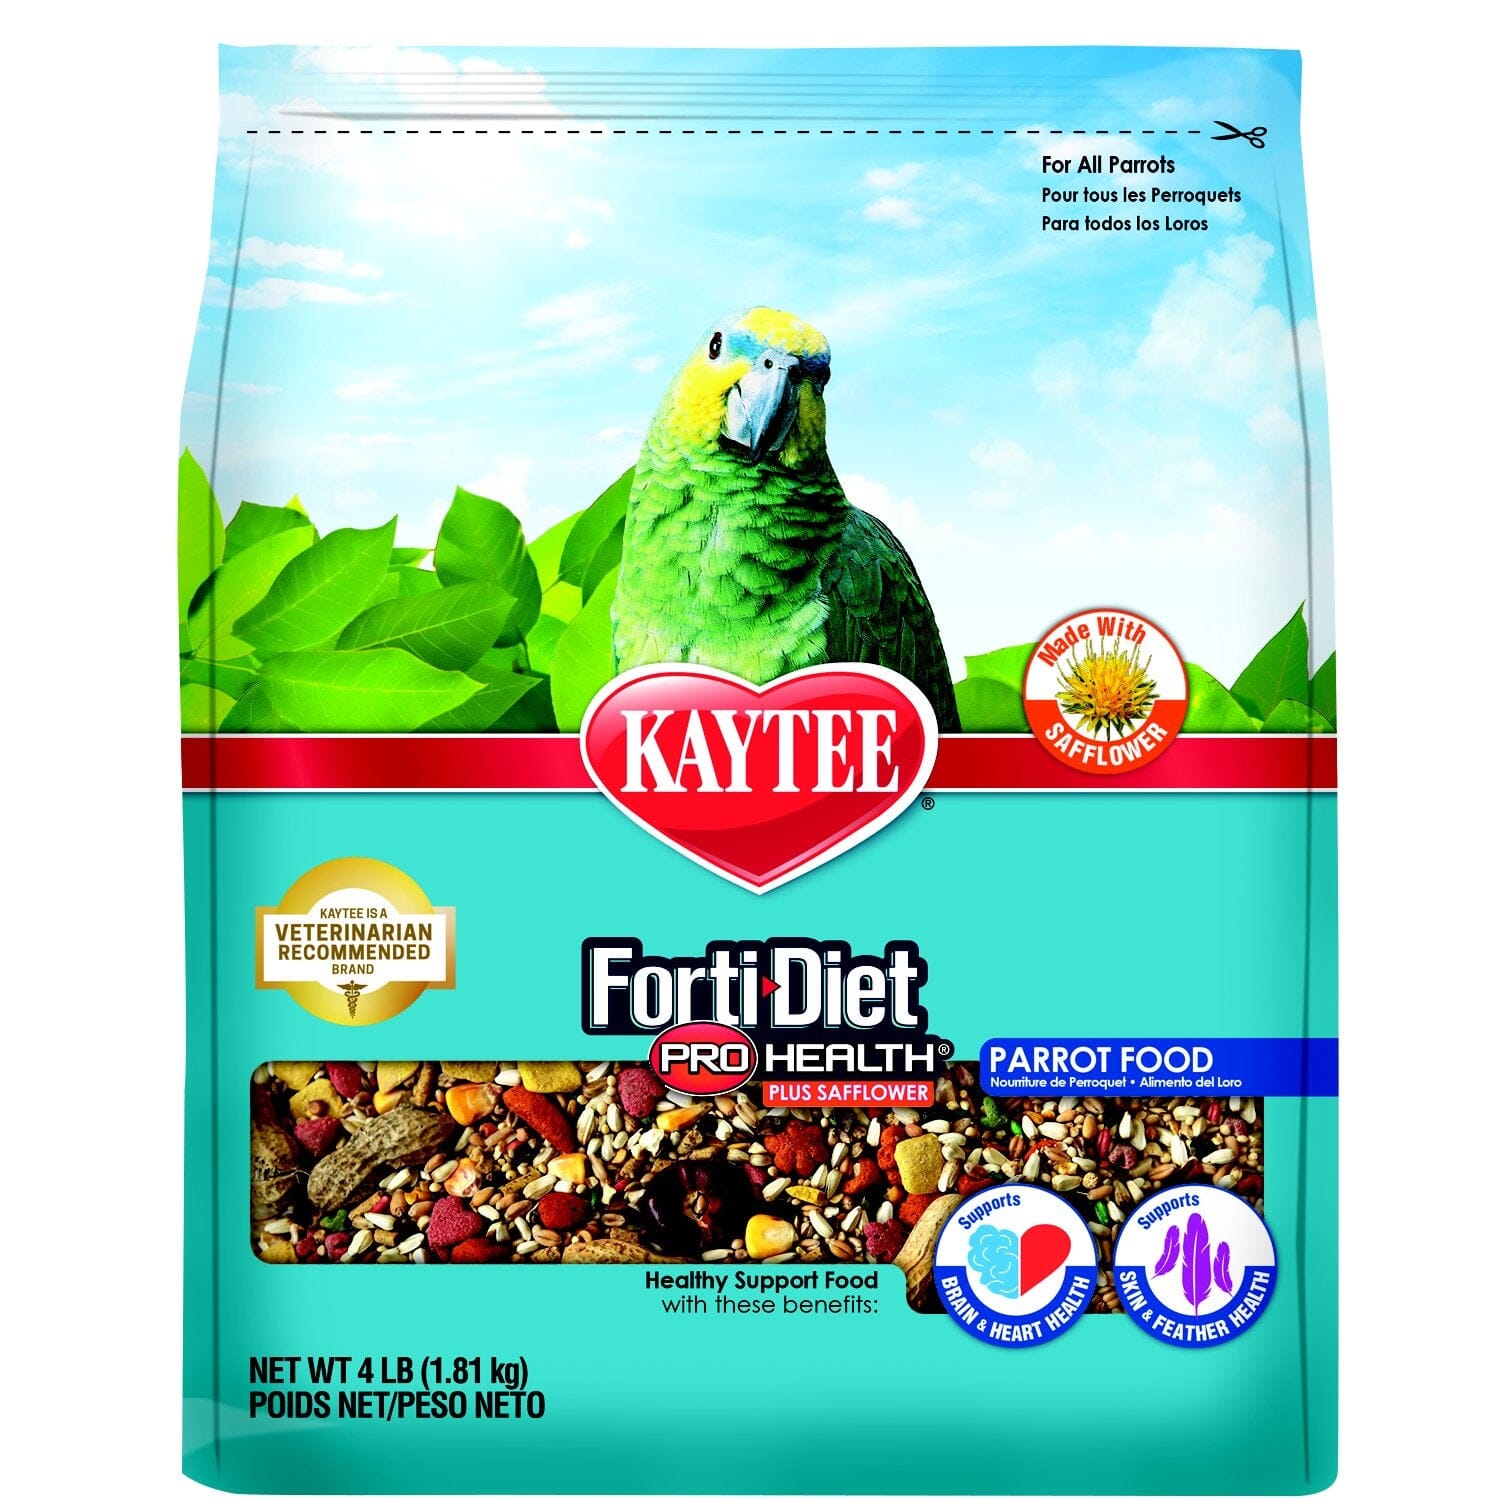 Kaytee Pro Health with Safflower Parrot Food - 4 lb  